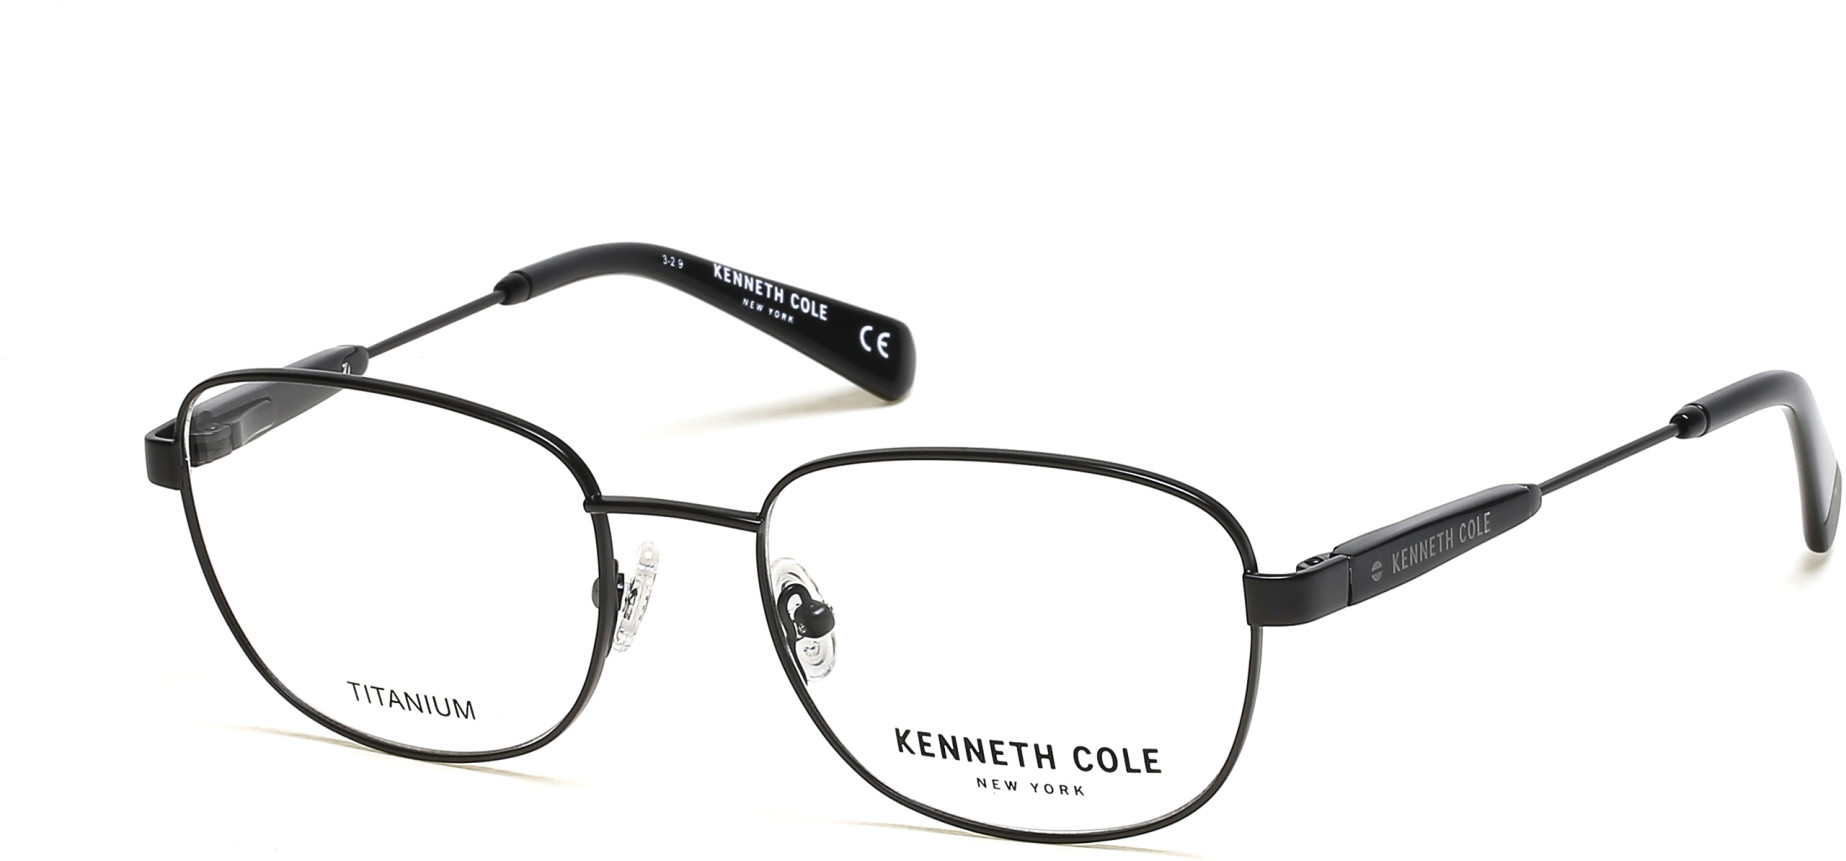 KENNETH COLE NY 0299 002